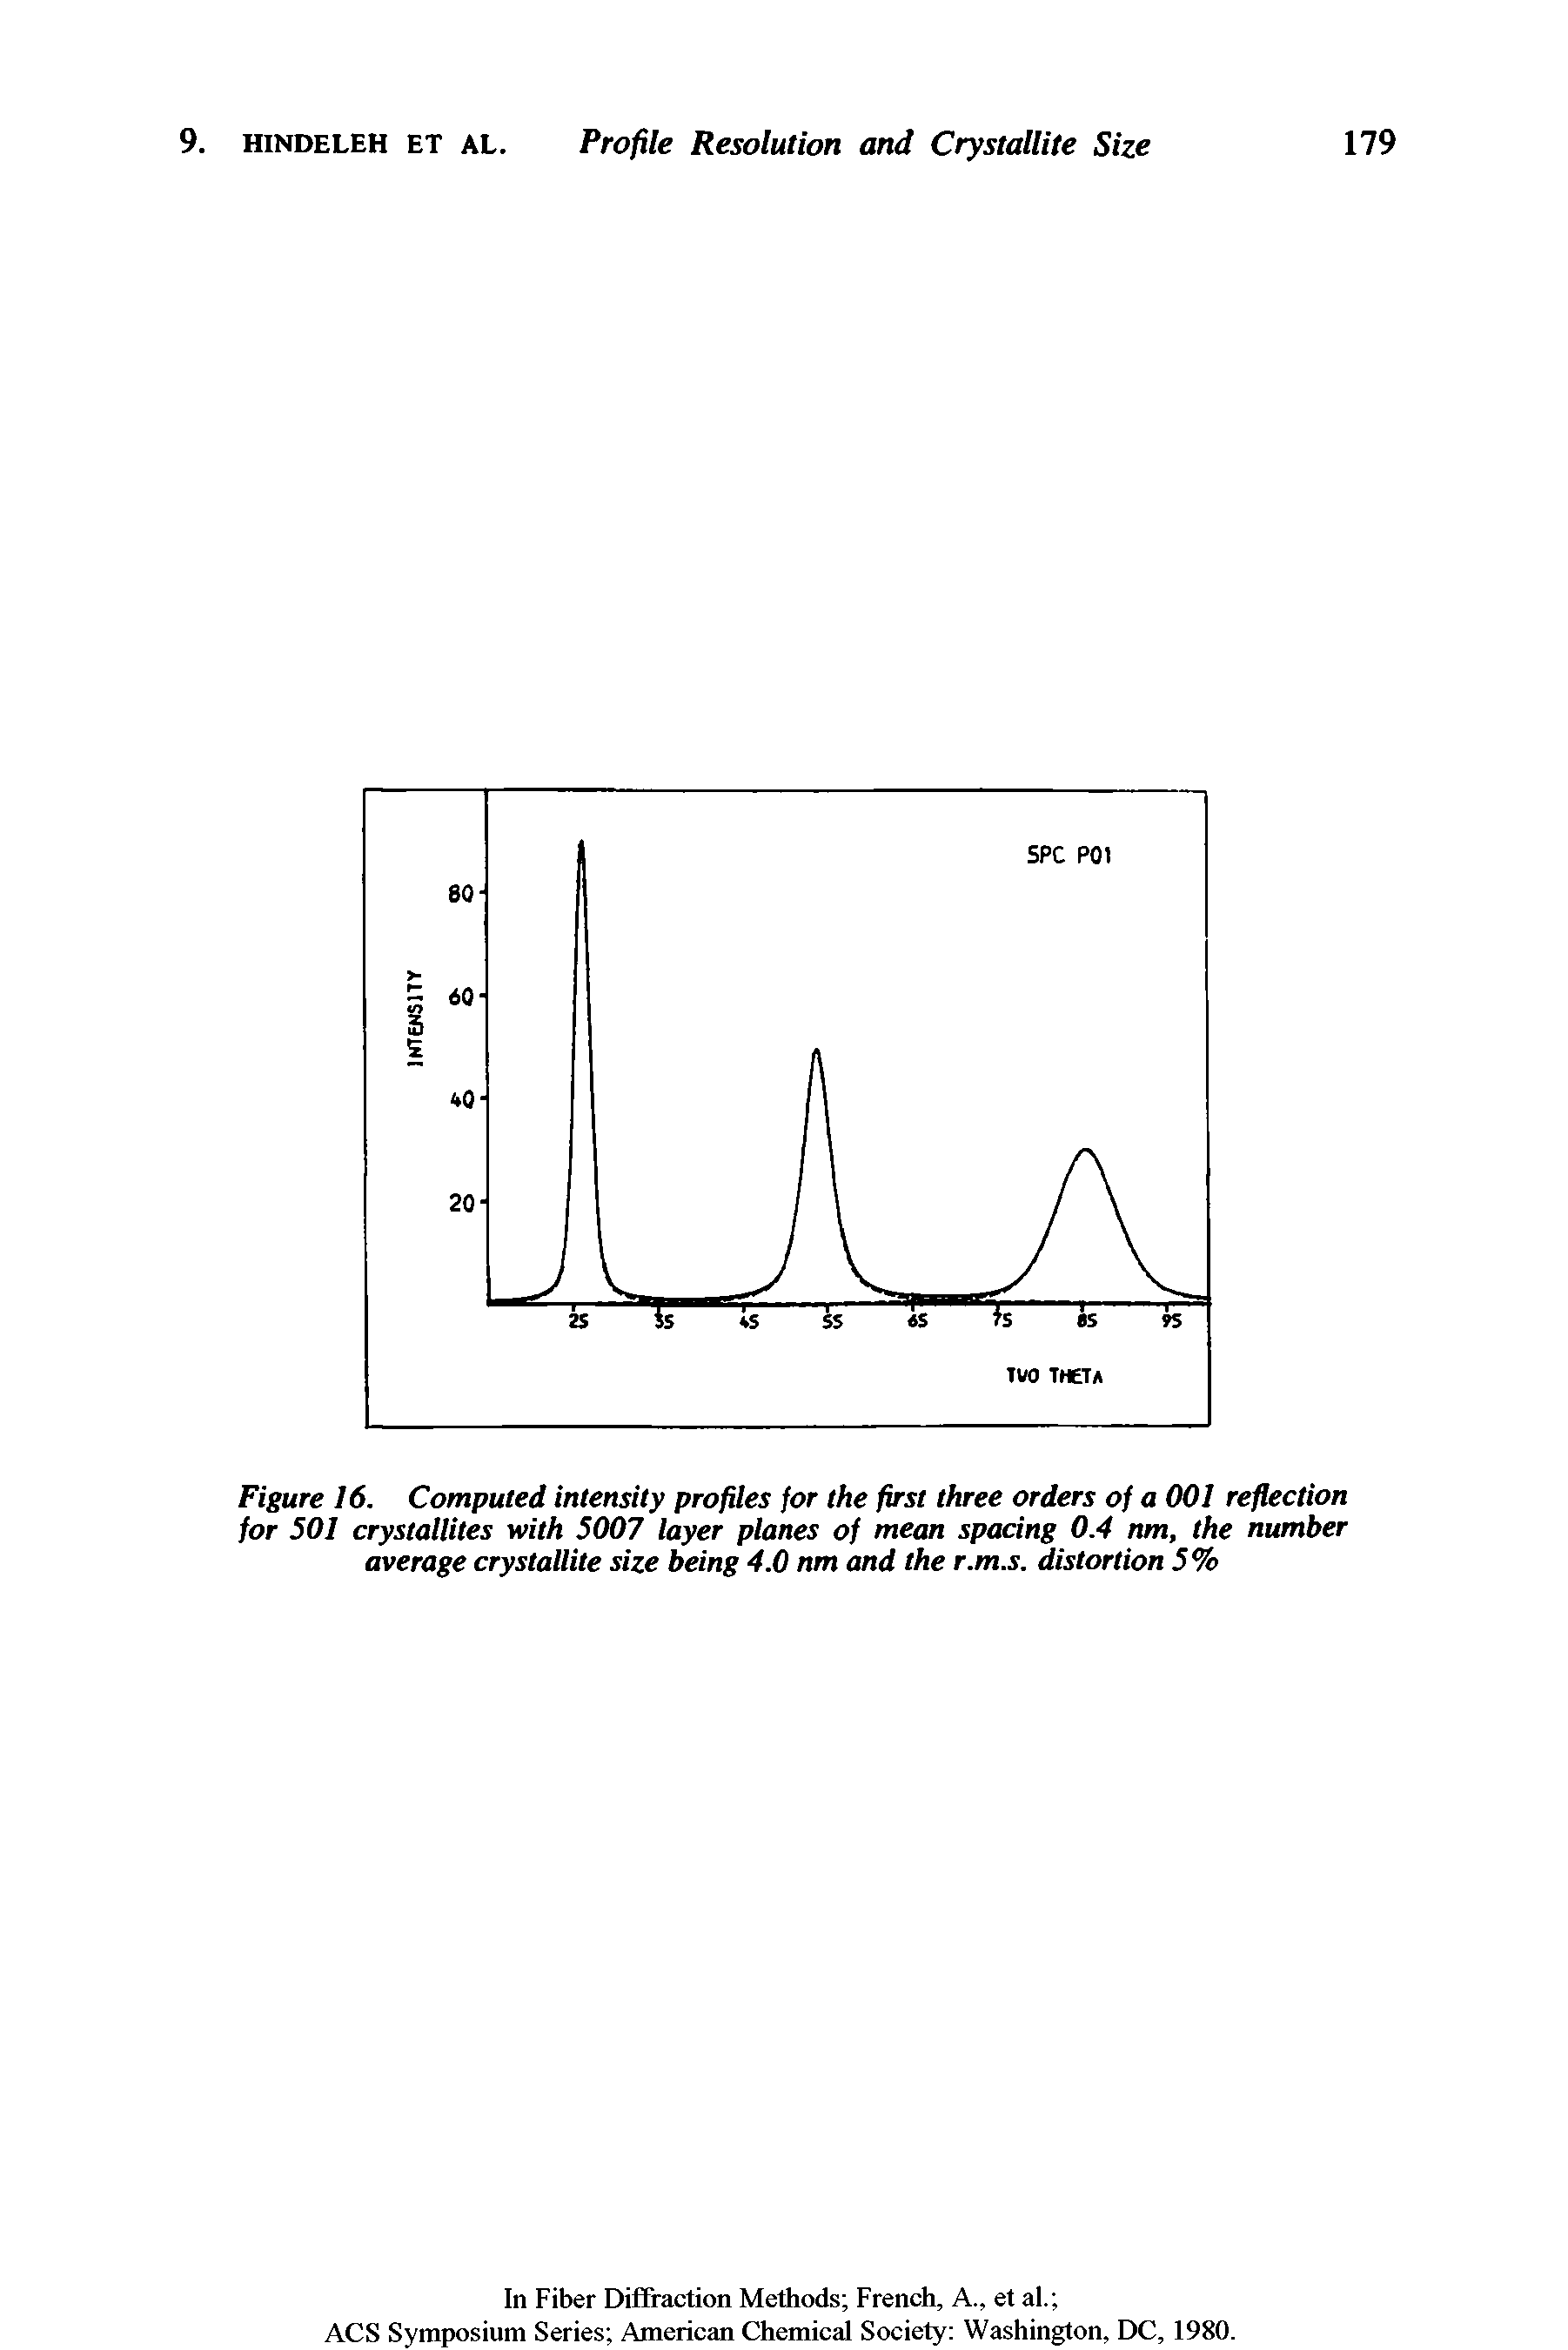 Figure 16. Computed intensity profiles for the first three orders of a 001 reflection for 501 crystallites with 5007 layer planes of mean spacing 0.4 nm, the number average crystallite size being 4.0 nm and the r.m.s. distortion 5%...